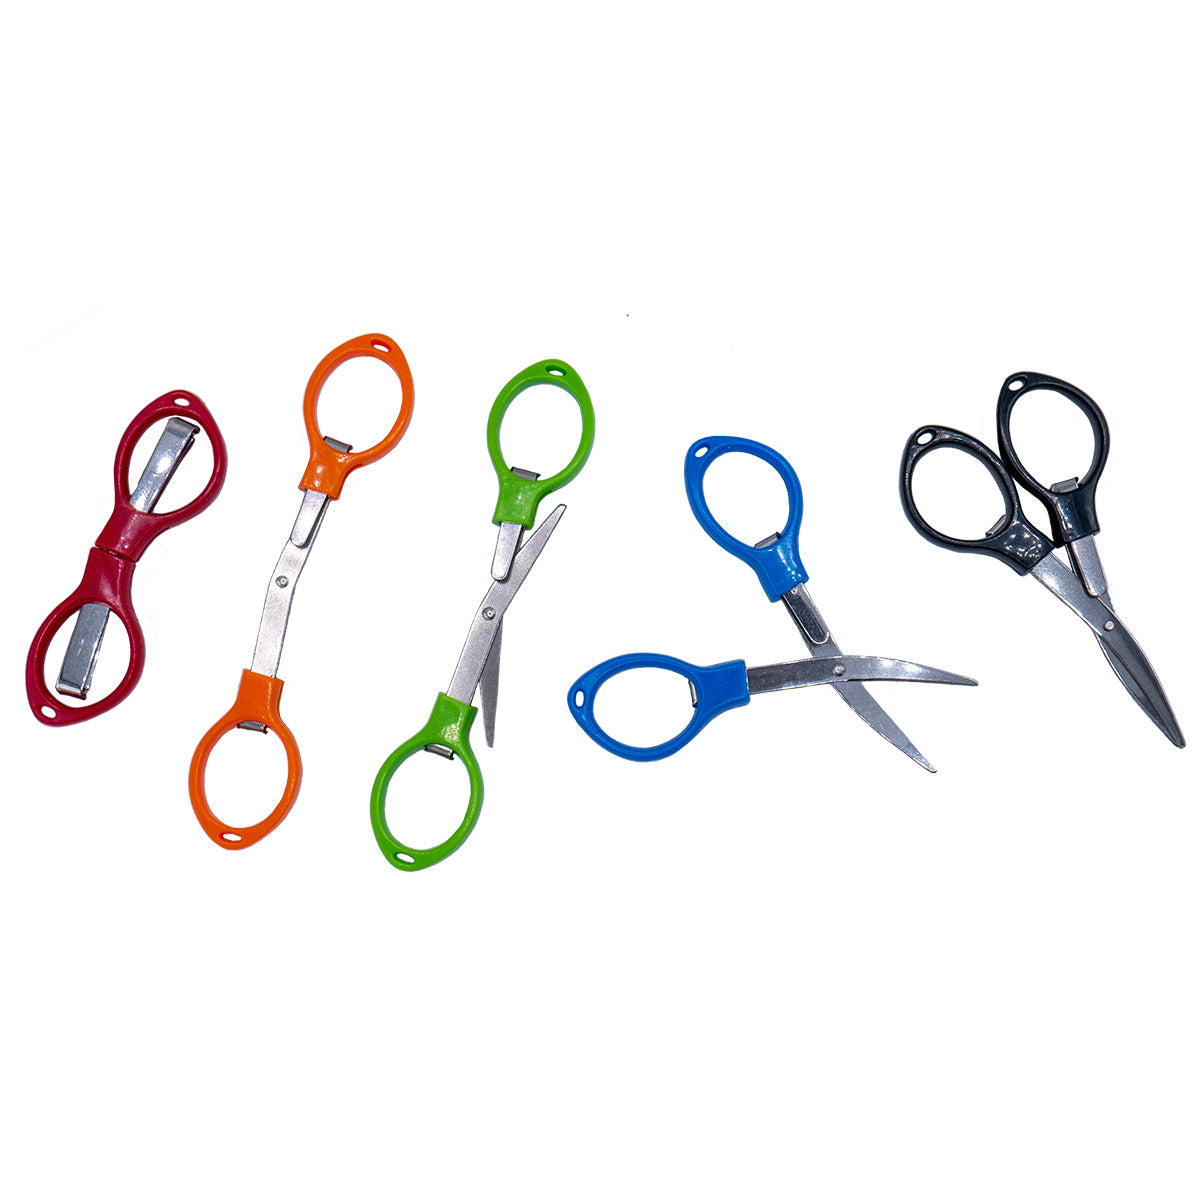 An array of folding scissors in various positions. From left to right: red scissors completely folded, orange scissors partially unfolded, green scissors in wide open cutting position, blue scissors in half closed cutting position, and black scissors in fully closed cutting position.